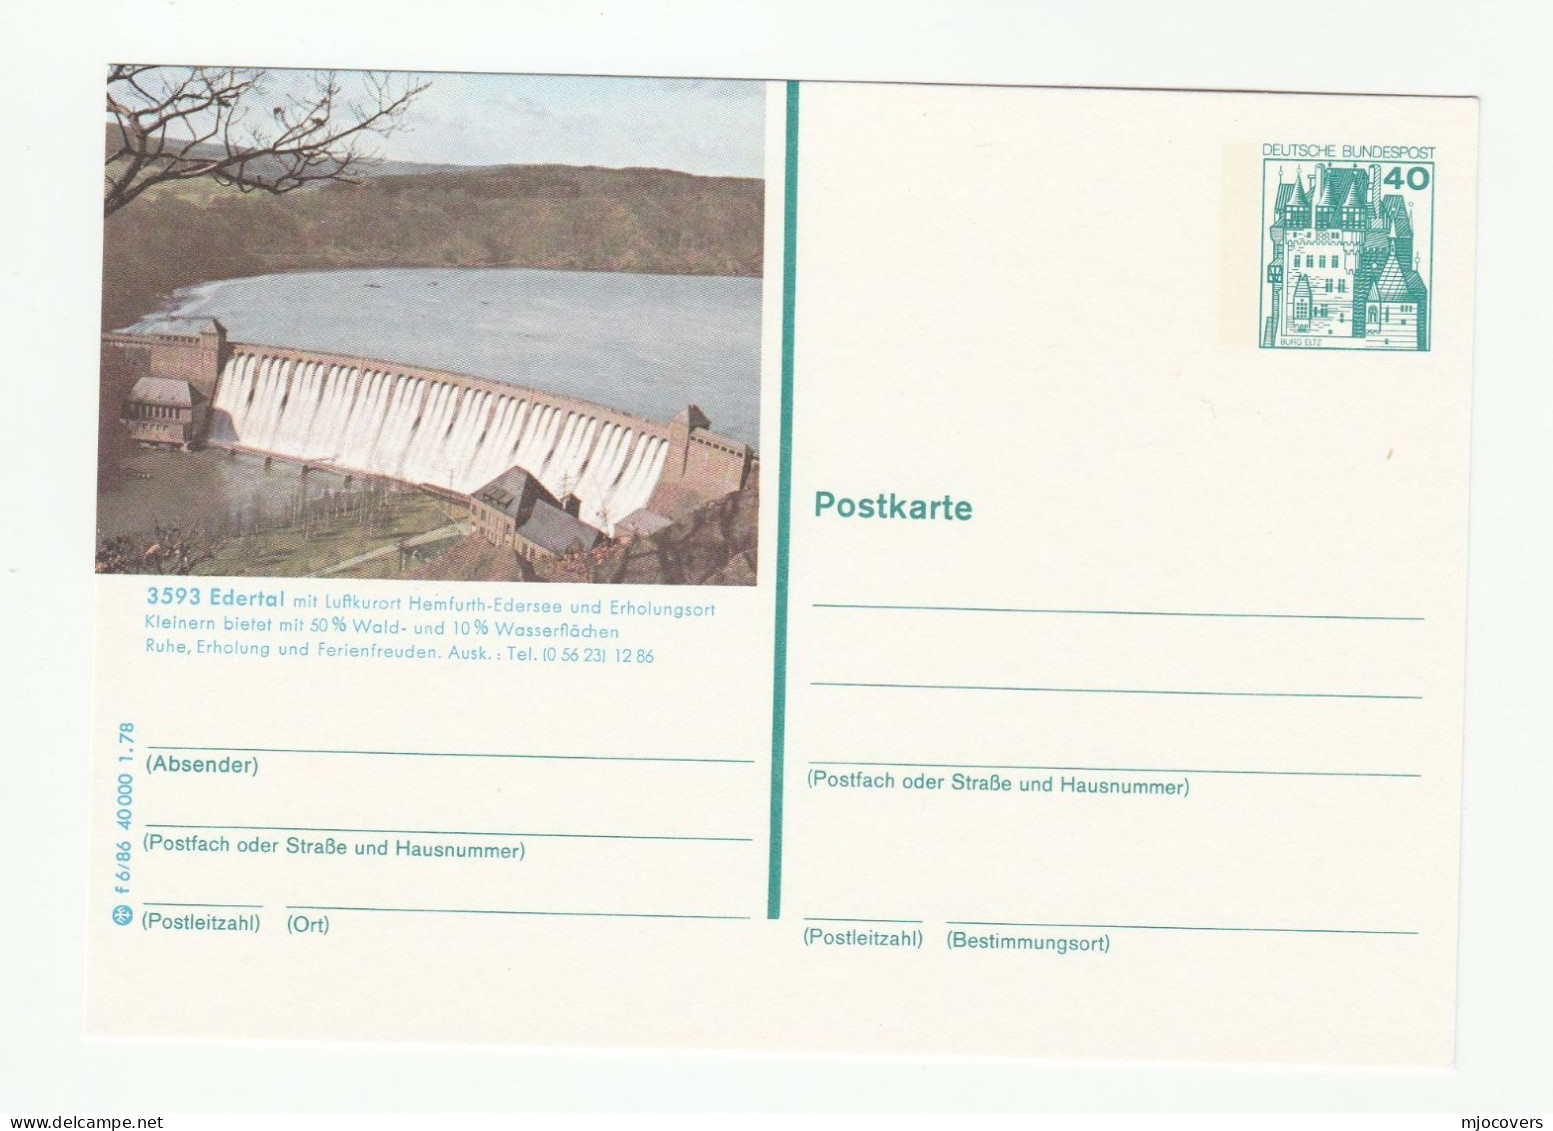 Edertal HYDROELECTRIC DAM Postal STATIONERY Card  1978 Germany Cover Electricity Energy Hydro Water - Acqua